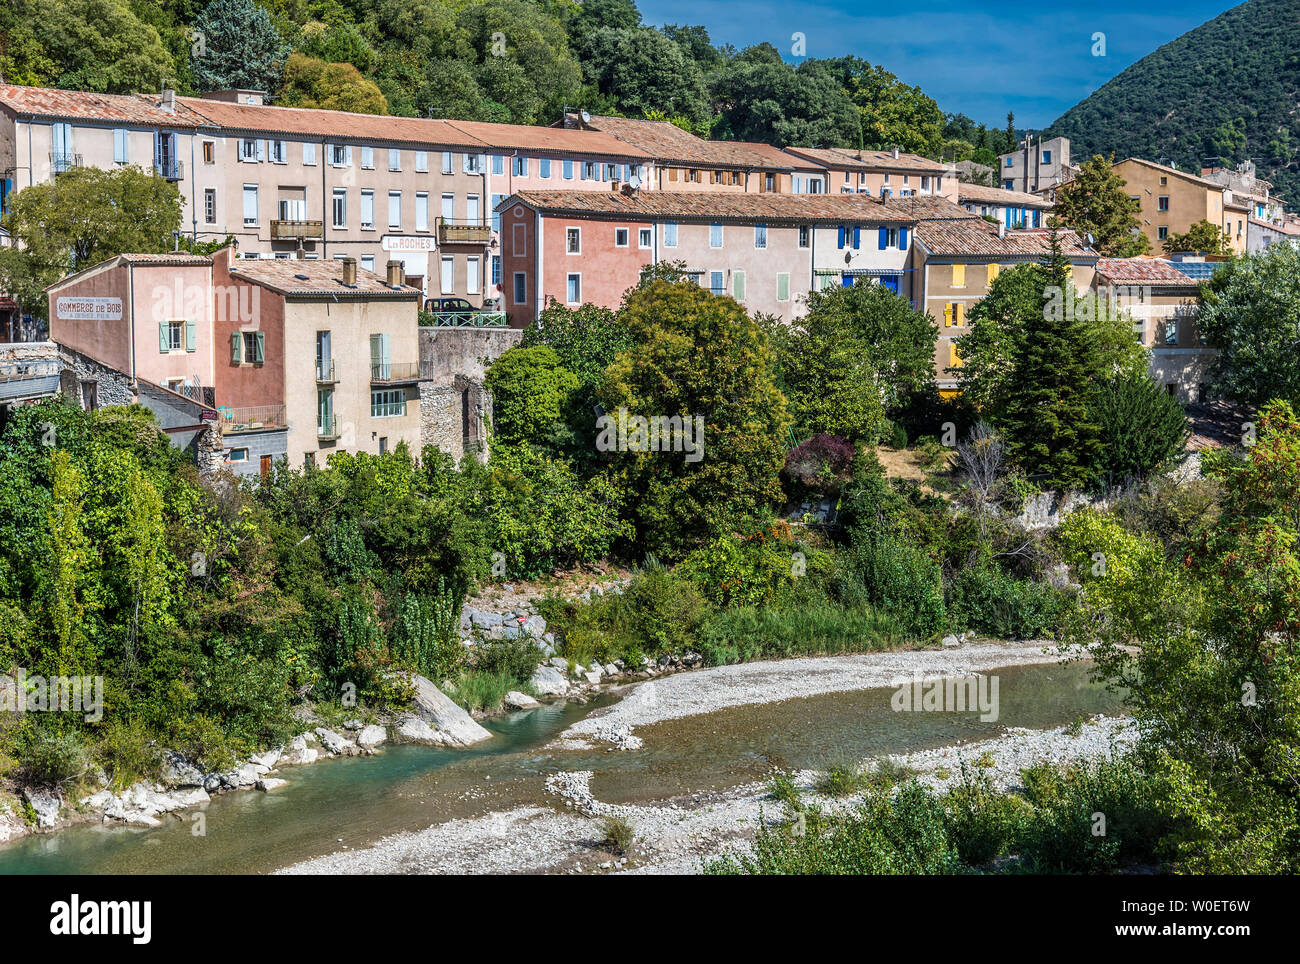 France, Auvergne Rhône Alpes region, Nyons, view on the houses along the Eygues river Stock Photo